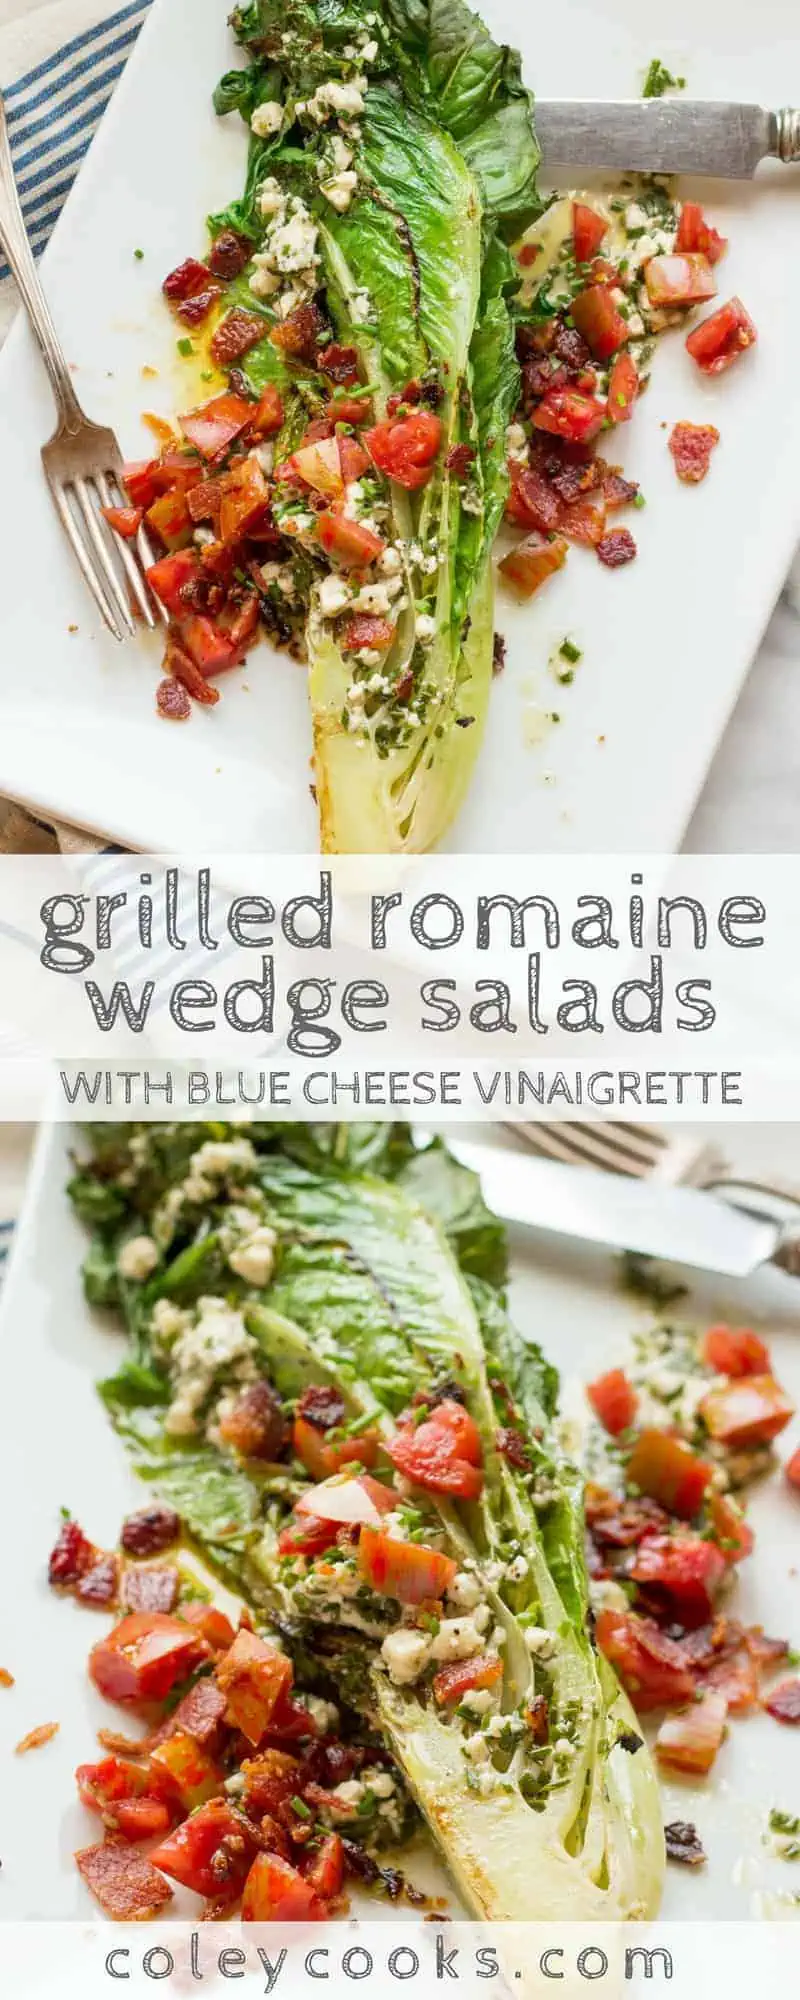 GRILLED ROMAINE WEDGE SALADS | This take on the classic steakhouse wedge salad uses romaine instead of iceberg, is grilled for more flavor, loaded with crispy bacon and juicy tomatoes, plus it's lighter thanks to a blue cheese vinaigrette! | ColeyCooks.com